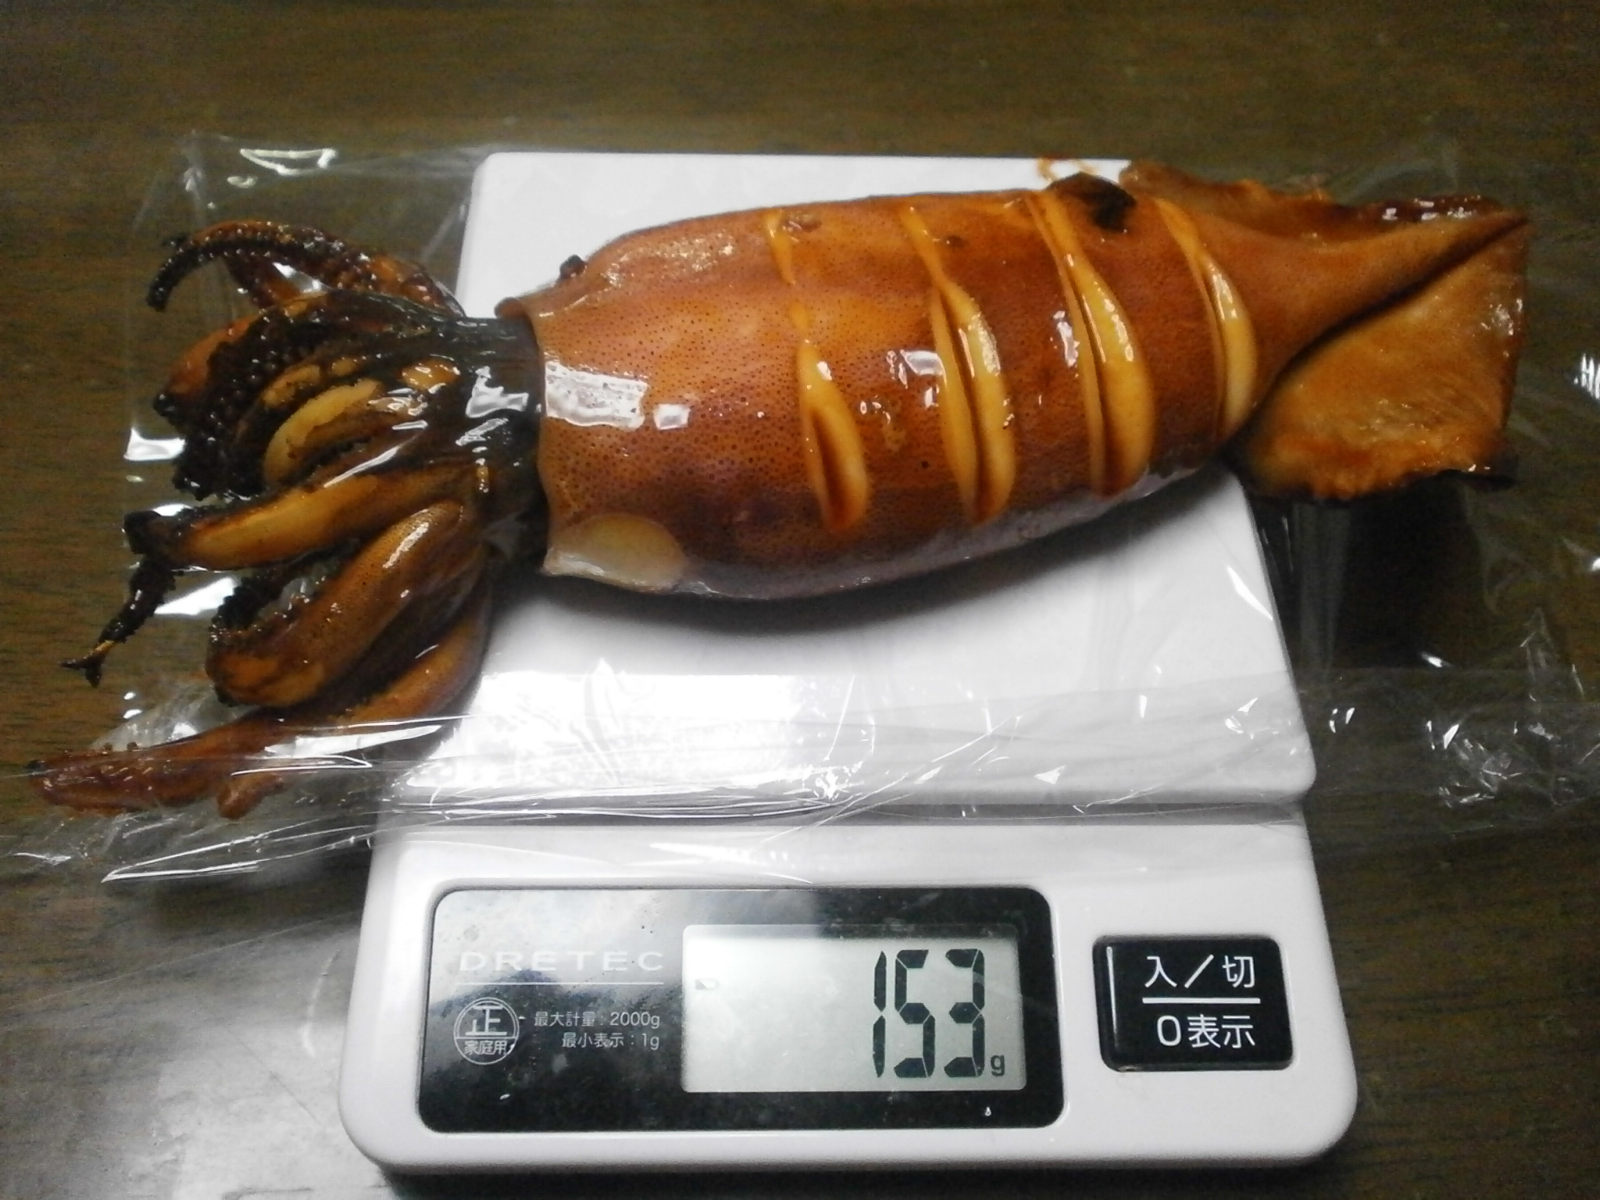 Broiled squid (153g/130g)